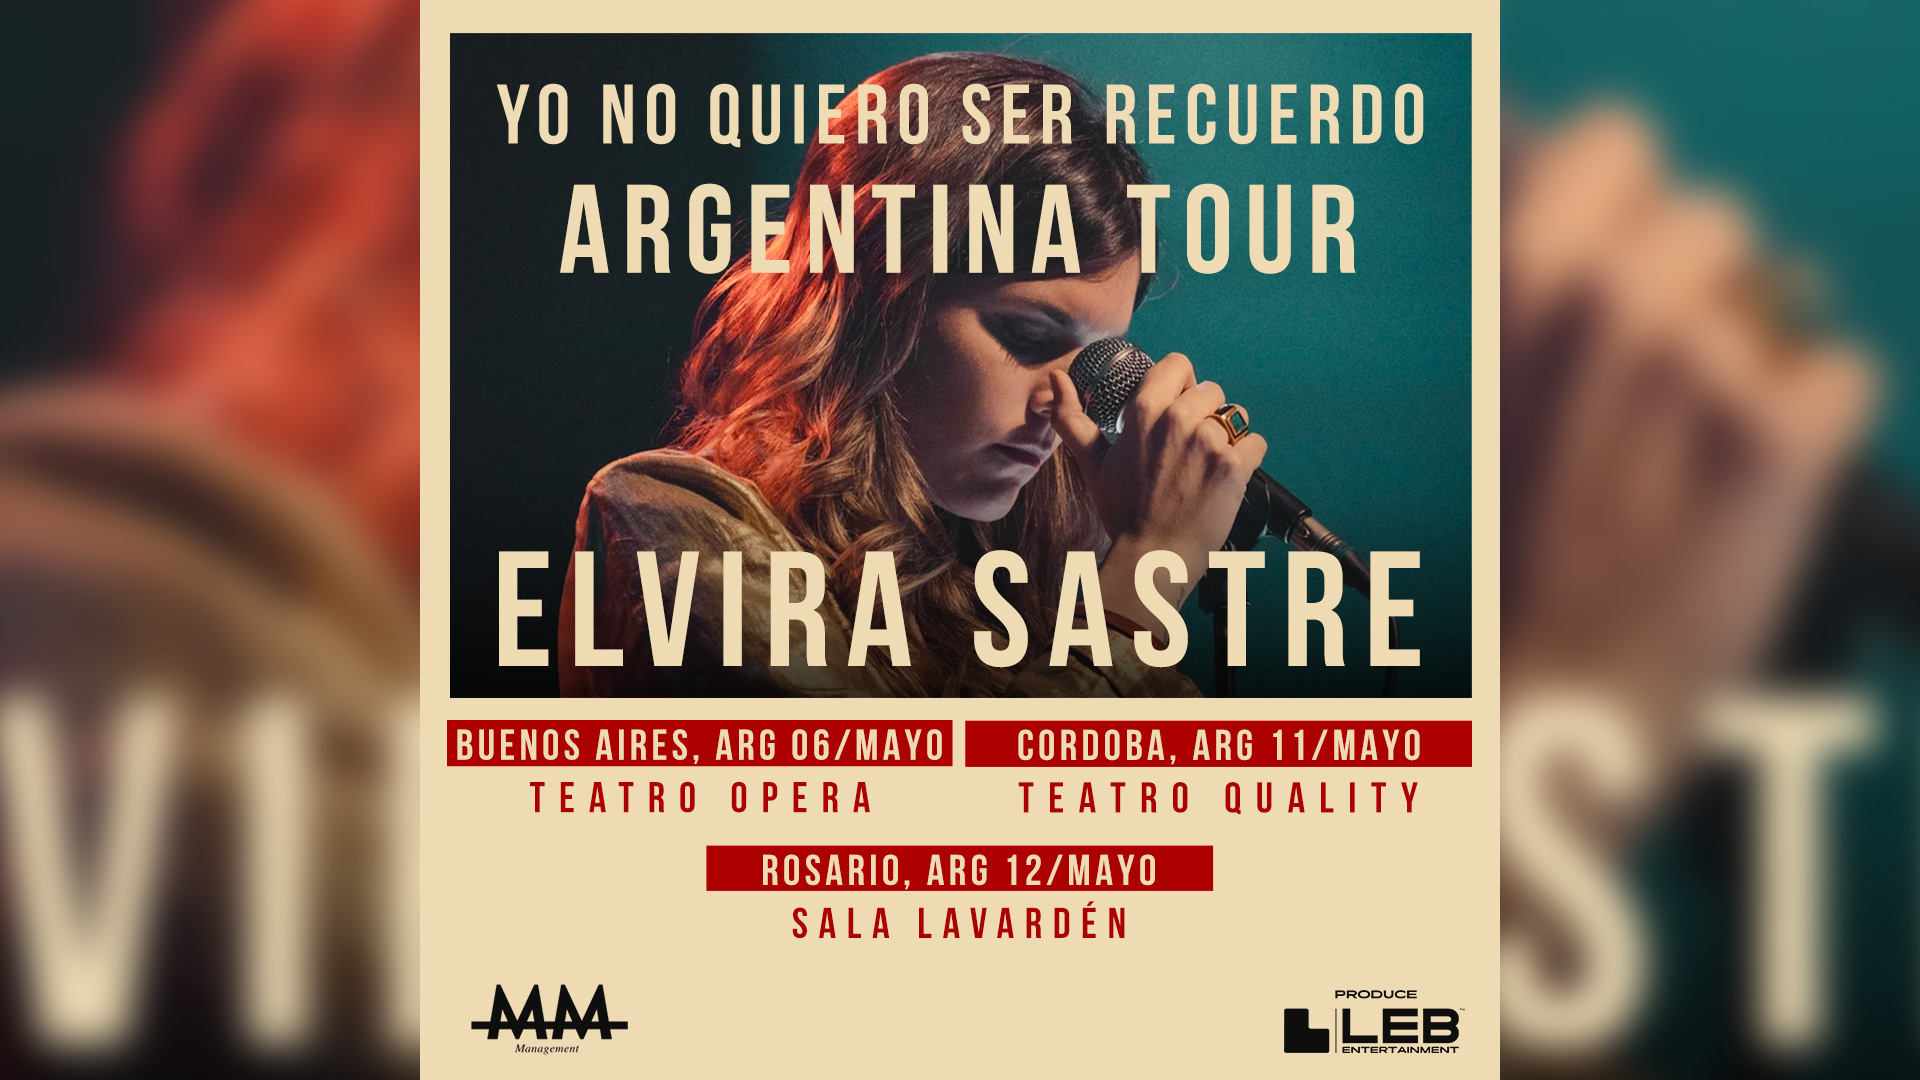 Elvira Sastre will perform again in Argentina in May 2023